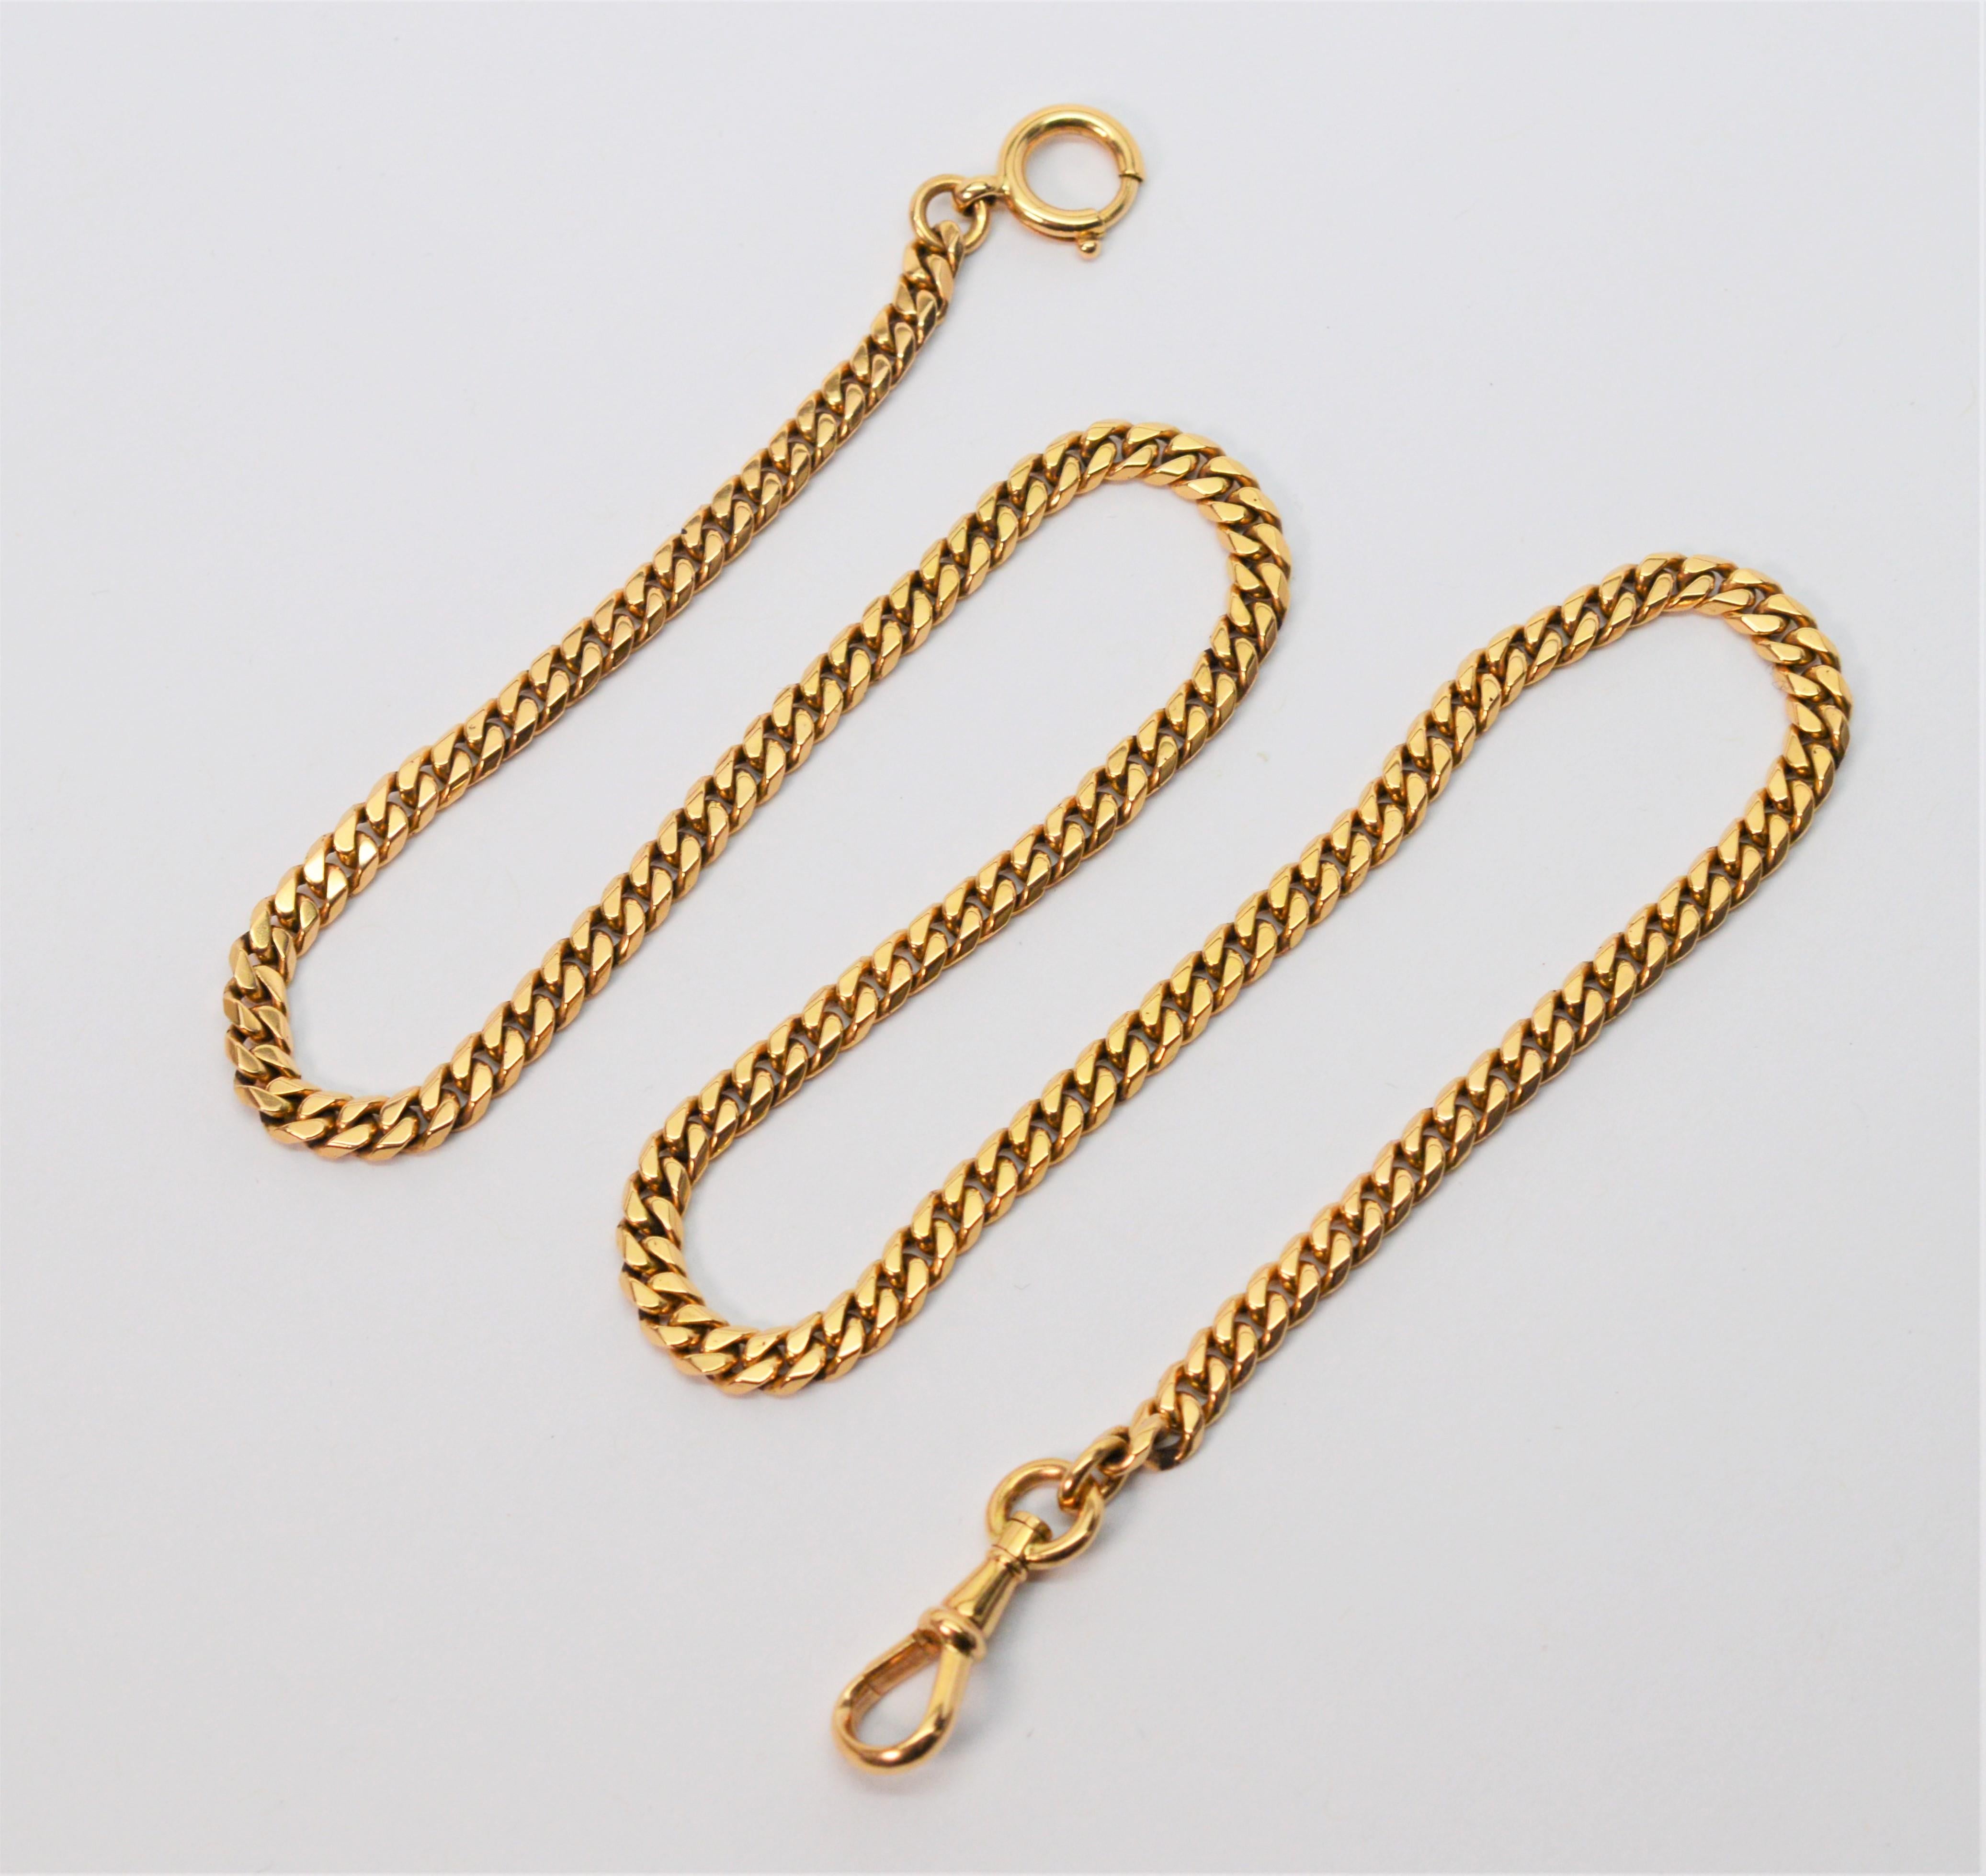 In fourteen karat 14K yellow gold, this vintage 17.75 inch pocket watch chain will regally accessorize a favorite gold pocket watch in your collection. Heavier gauge at a 3.75 mm width this classic flat curb style chain is outfitted with a swivel